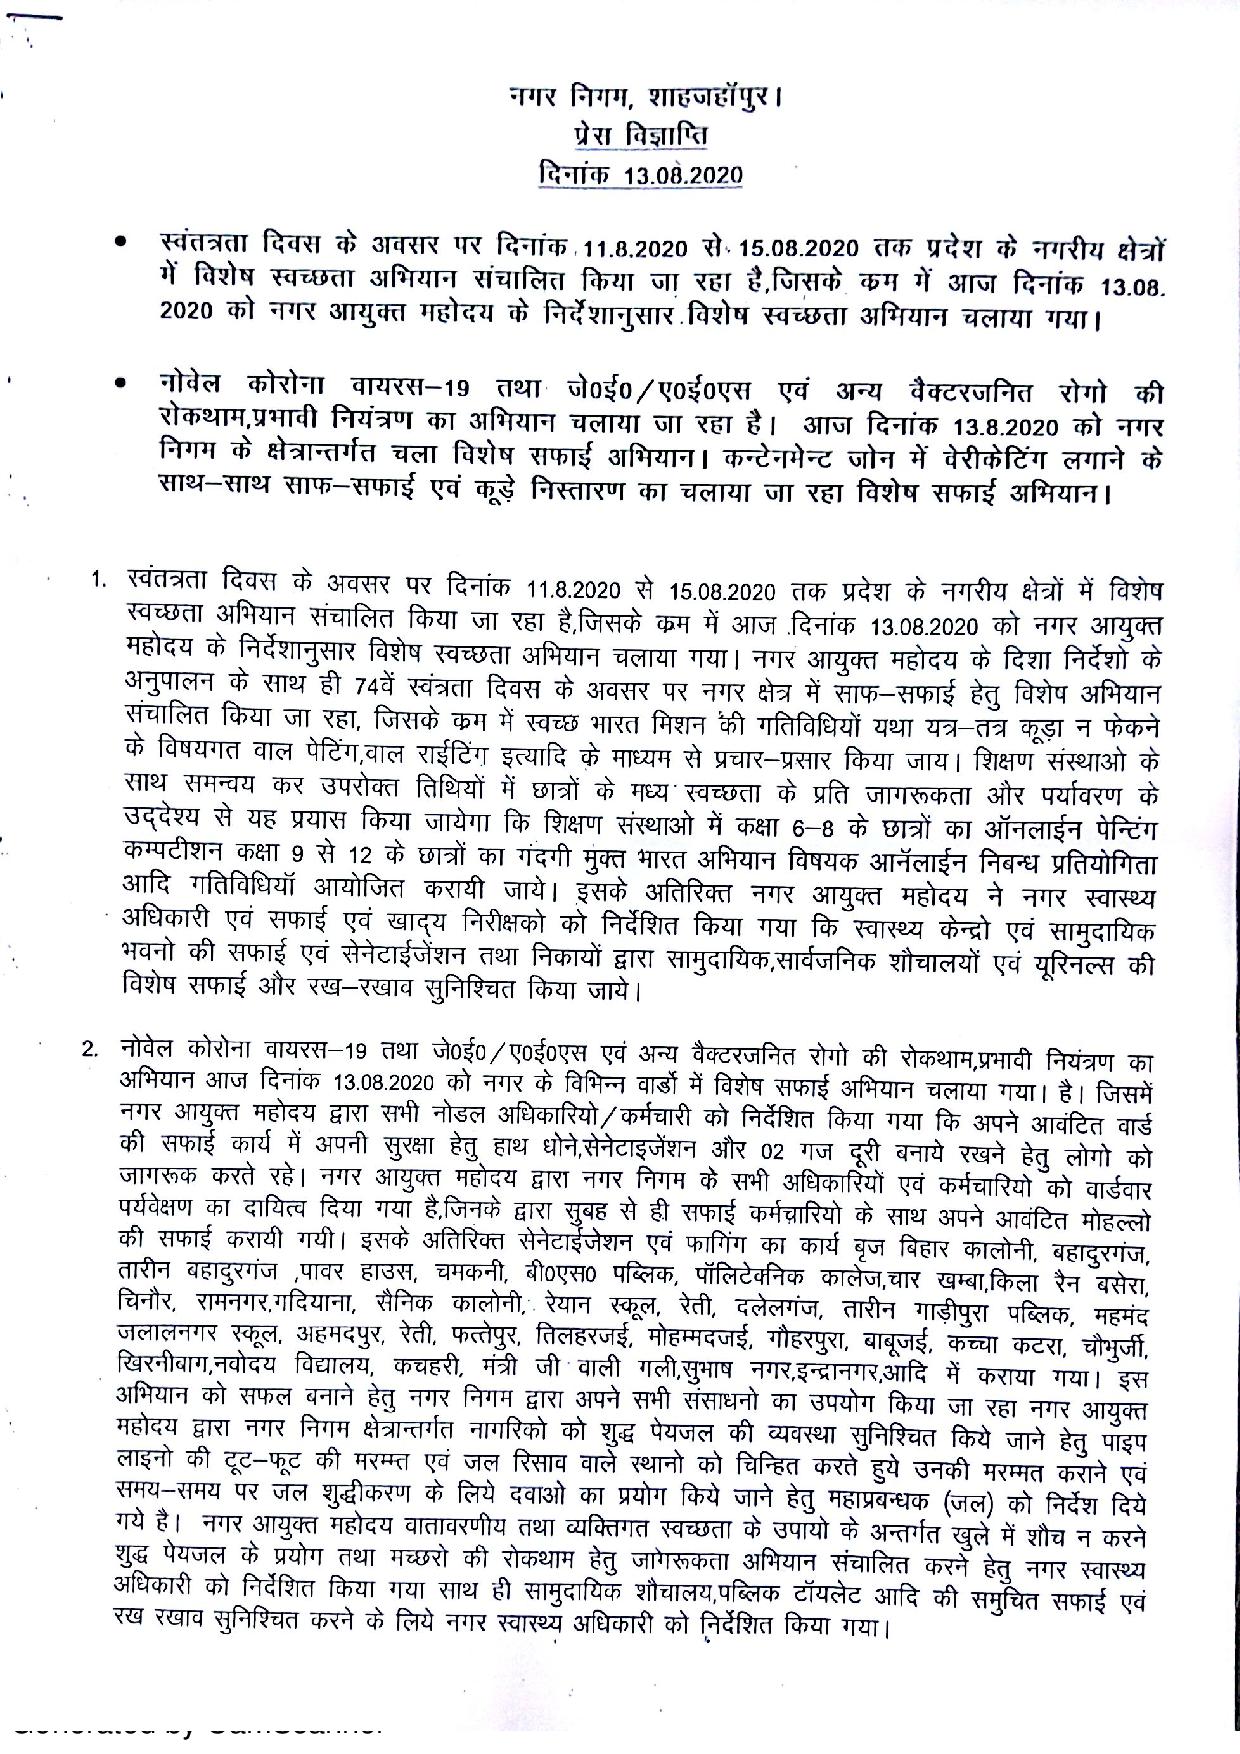 Regarding cleanliness program held on 13.08.2020 on the occasion of Independence Day in the order of Cleanliness Drive being observed from 11.08.2020 to 15.08.2020